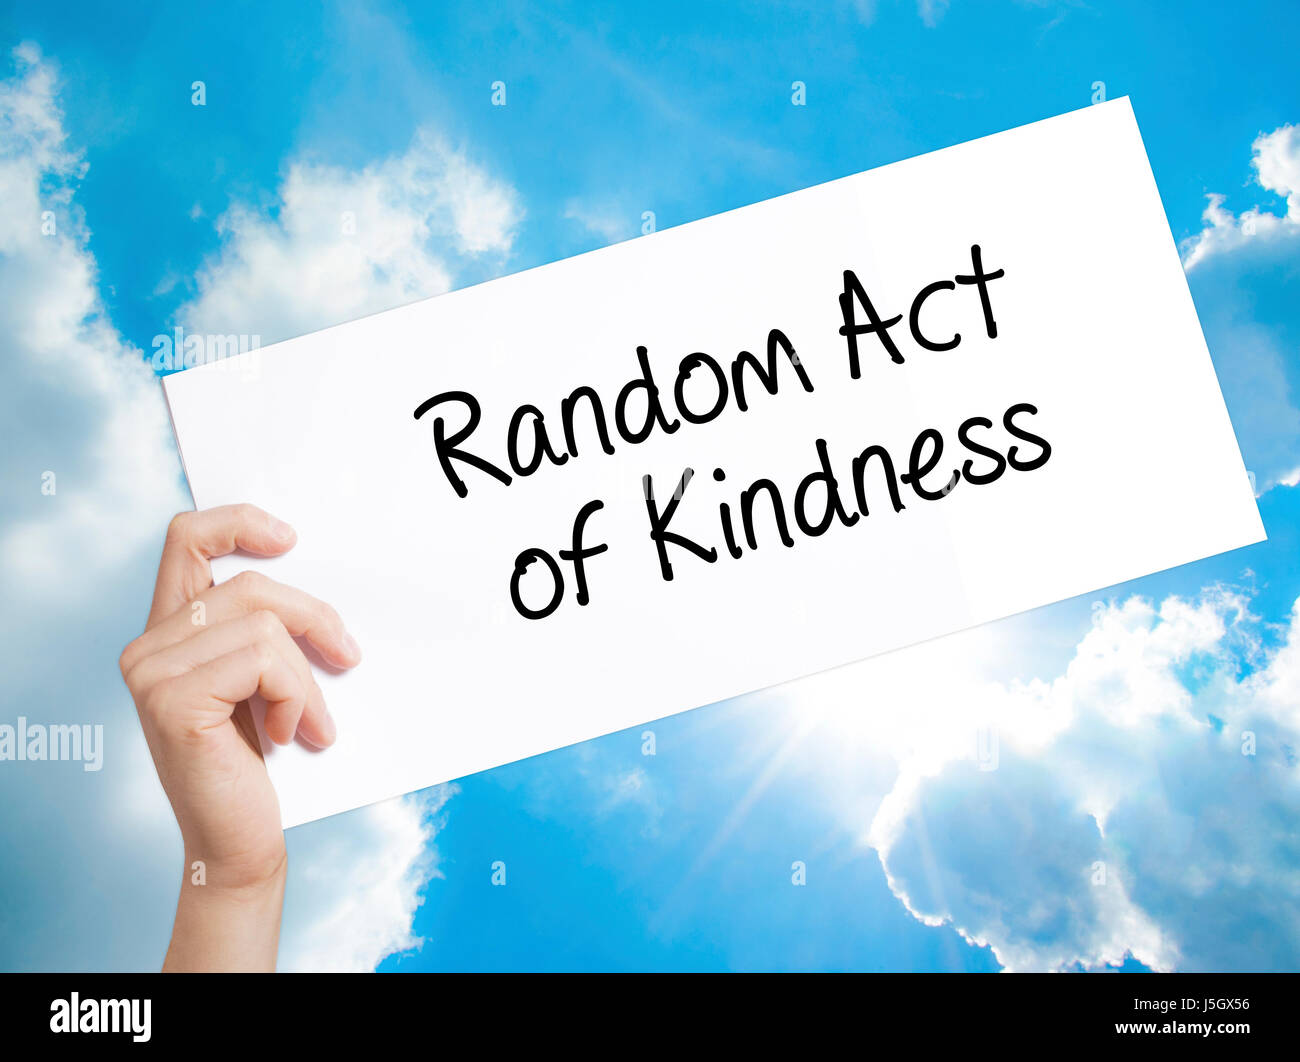 Random Act of Kindness Sign on white paper. Man Hand Holding Paper with text. Isolated on sky background.   Business concept. Stock Photo Stock Photo